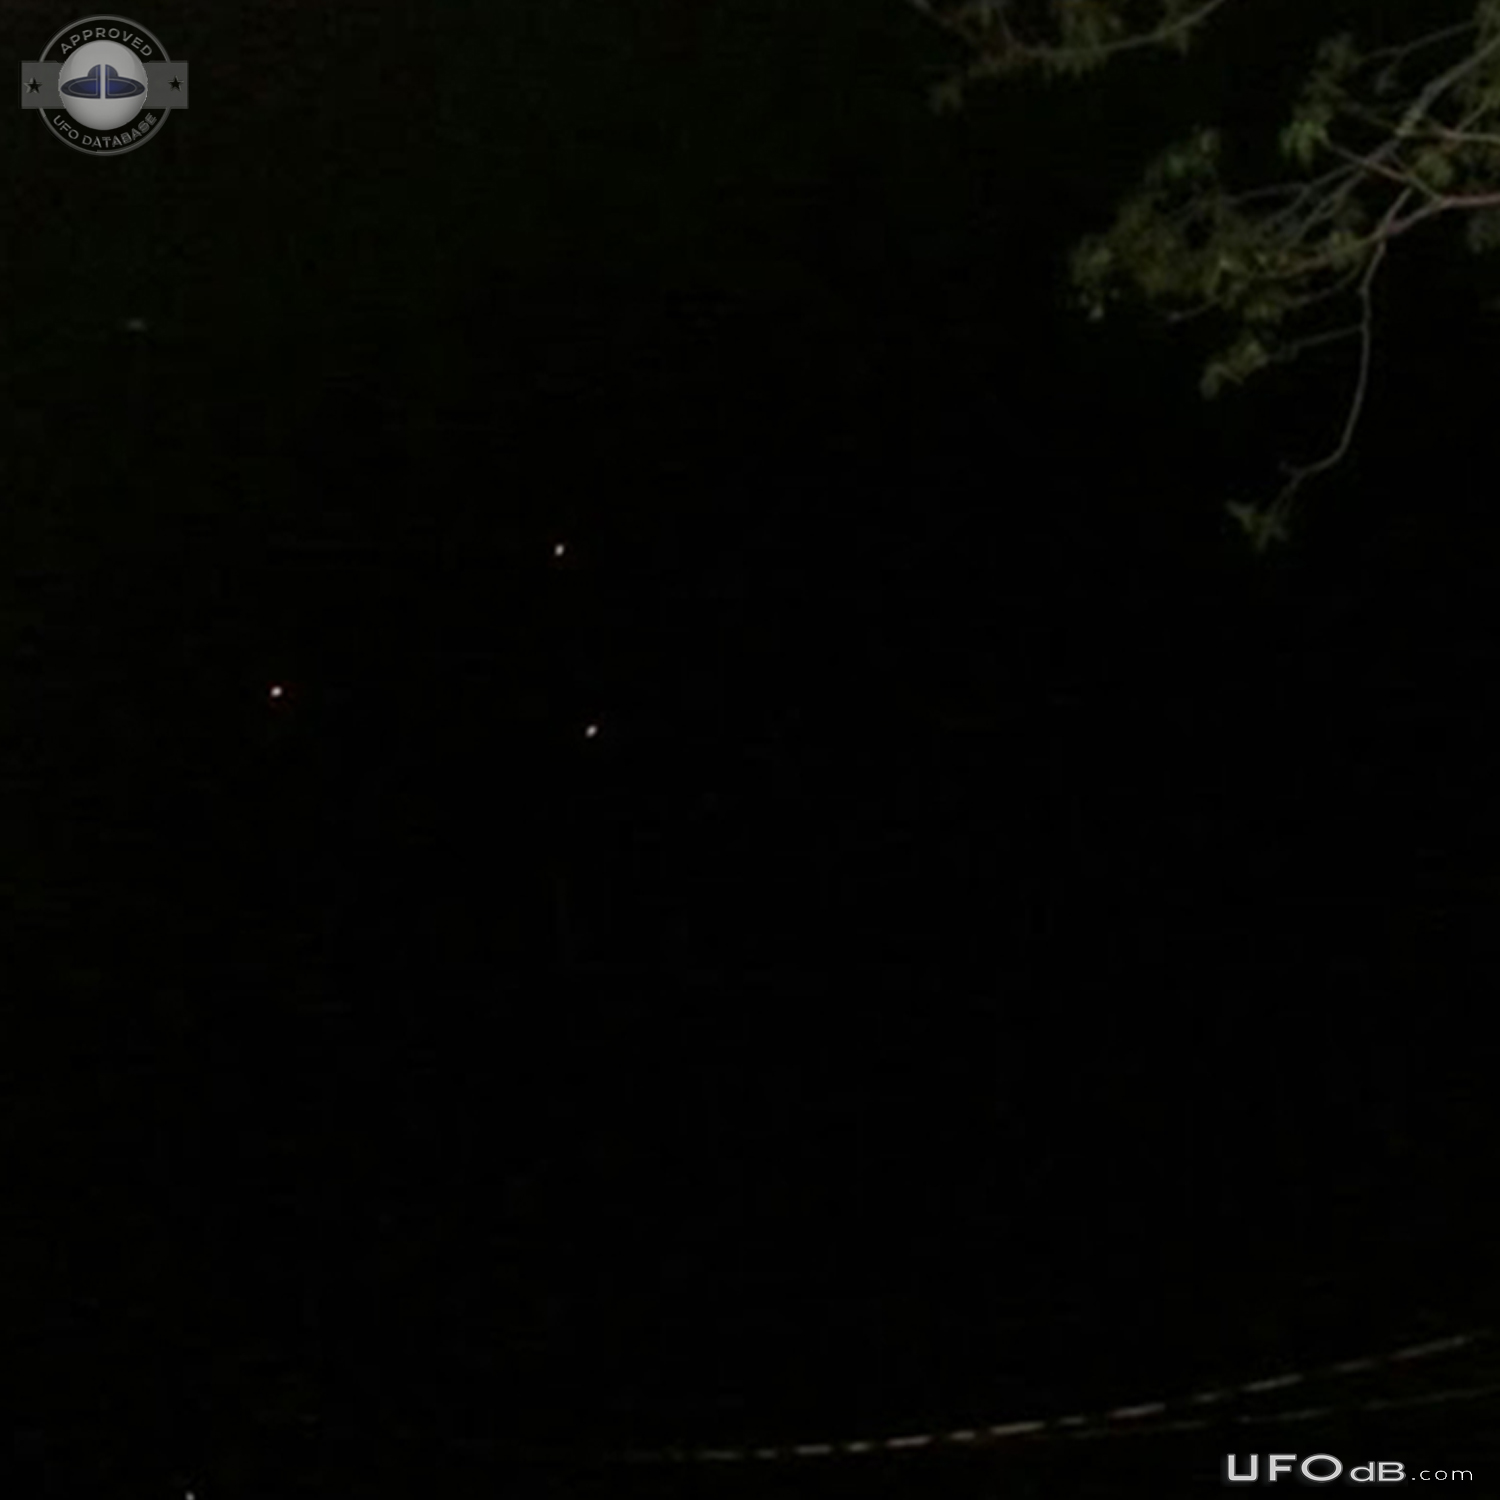 UFO Lights in triangle formation on picture - North Bay Ontario - 2015 UFO Picture #694-3